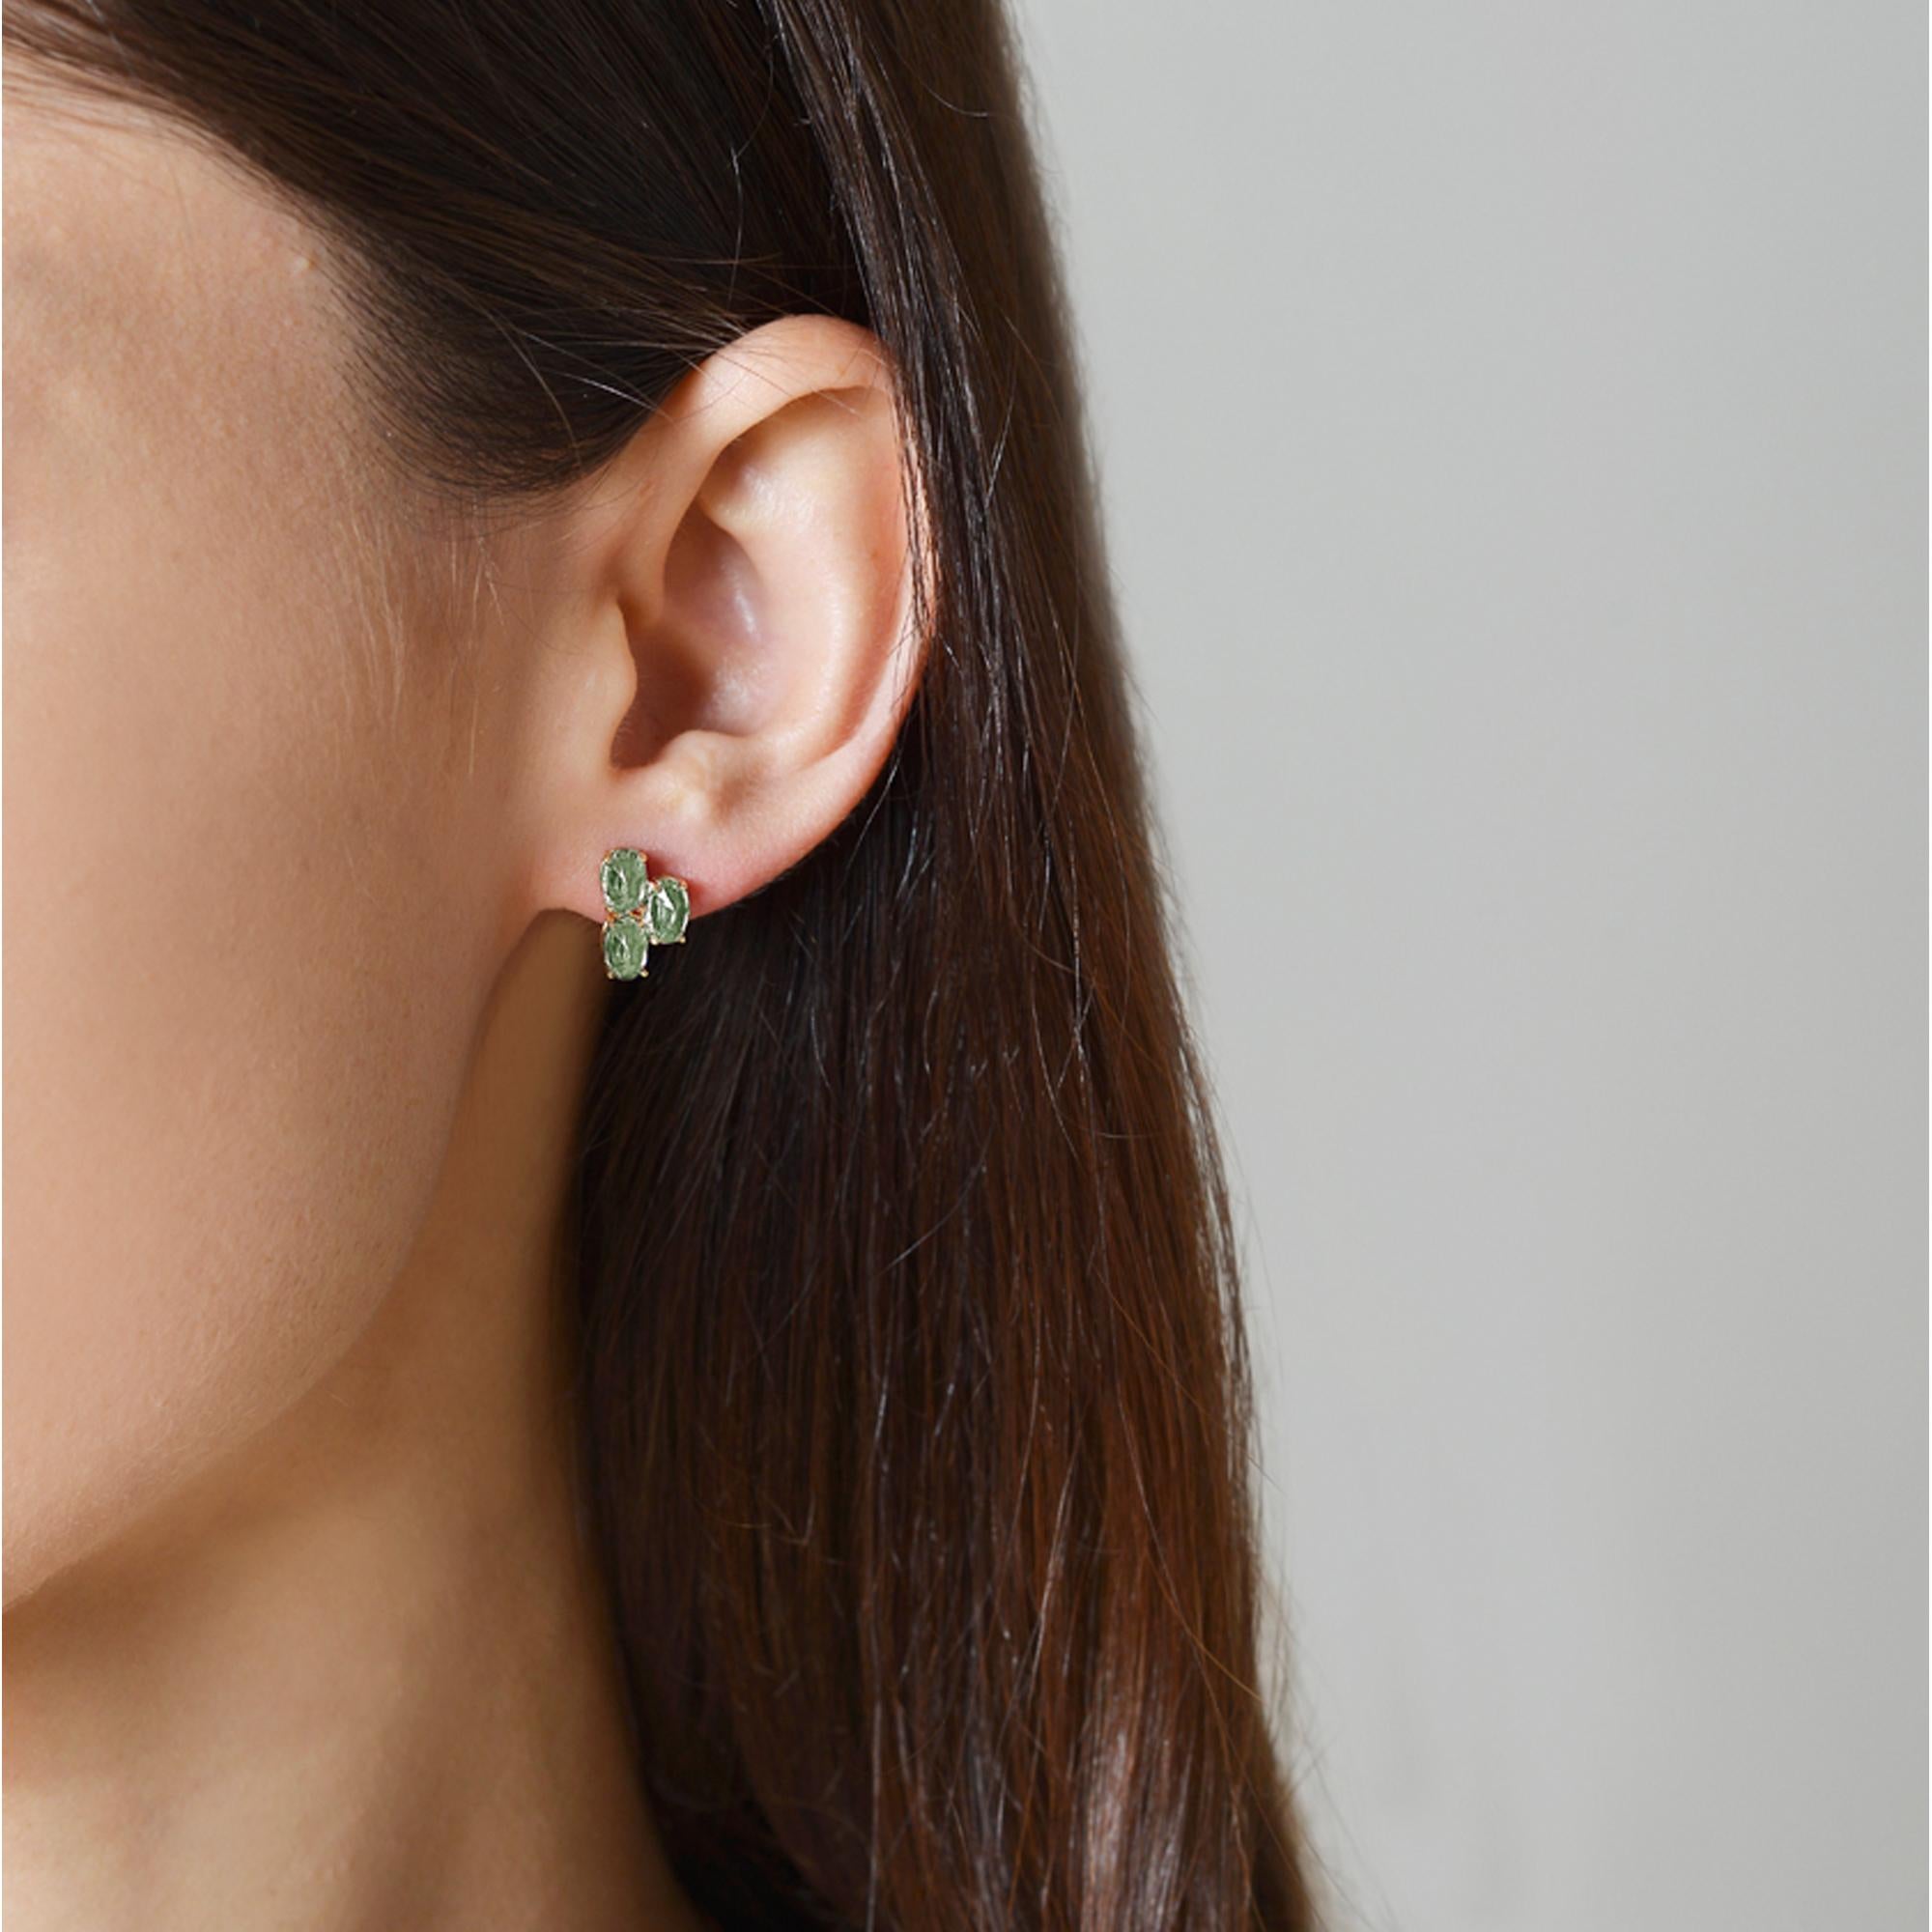 Contemporary Paolo Costagli 18 Karat Yellow Gold Green Sapphire Ombré Stud Earring Set For Sale